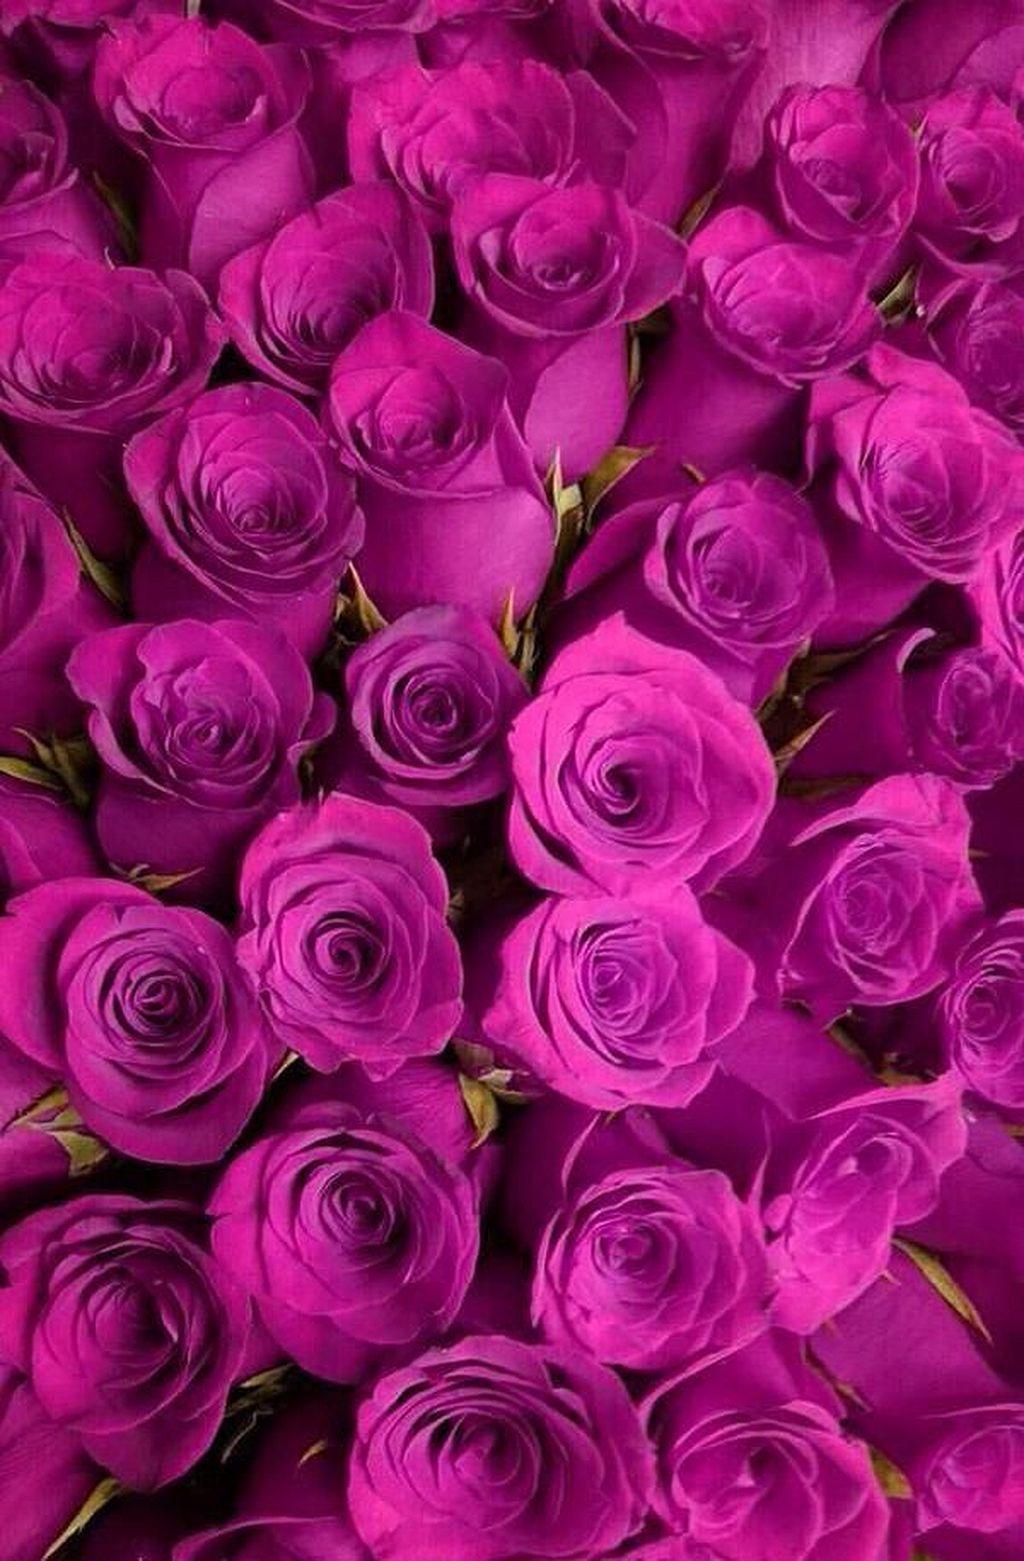 Purple and Pink Roses Wallpapers - Top Free Purple and Pink Roses ...